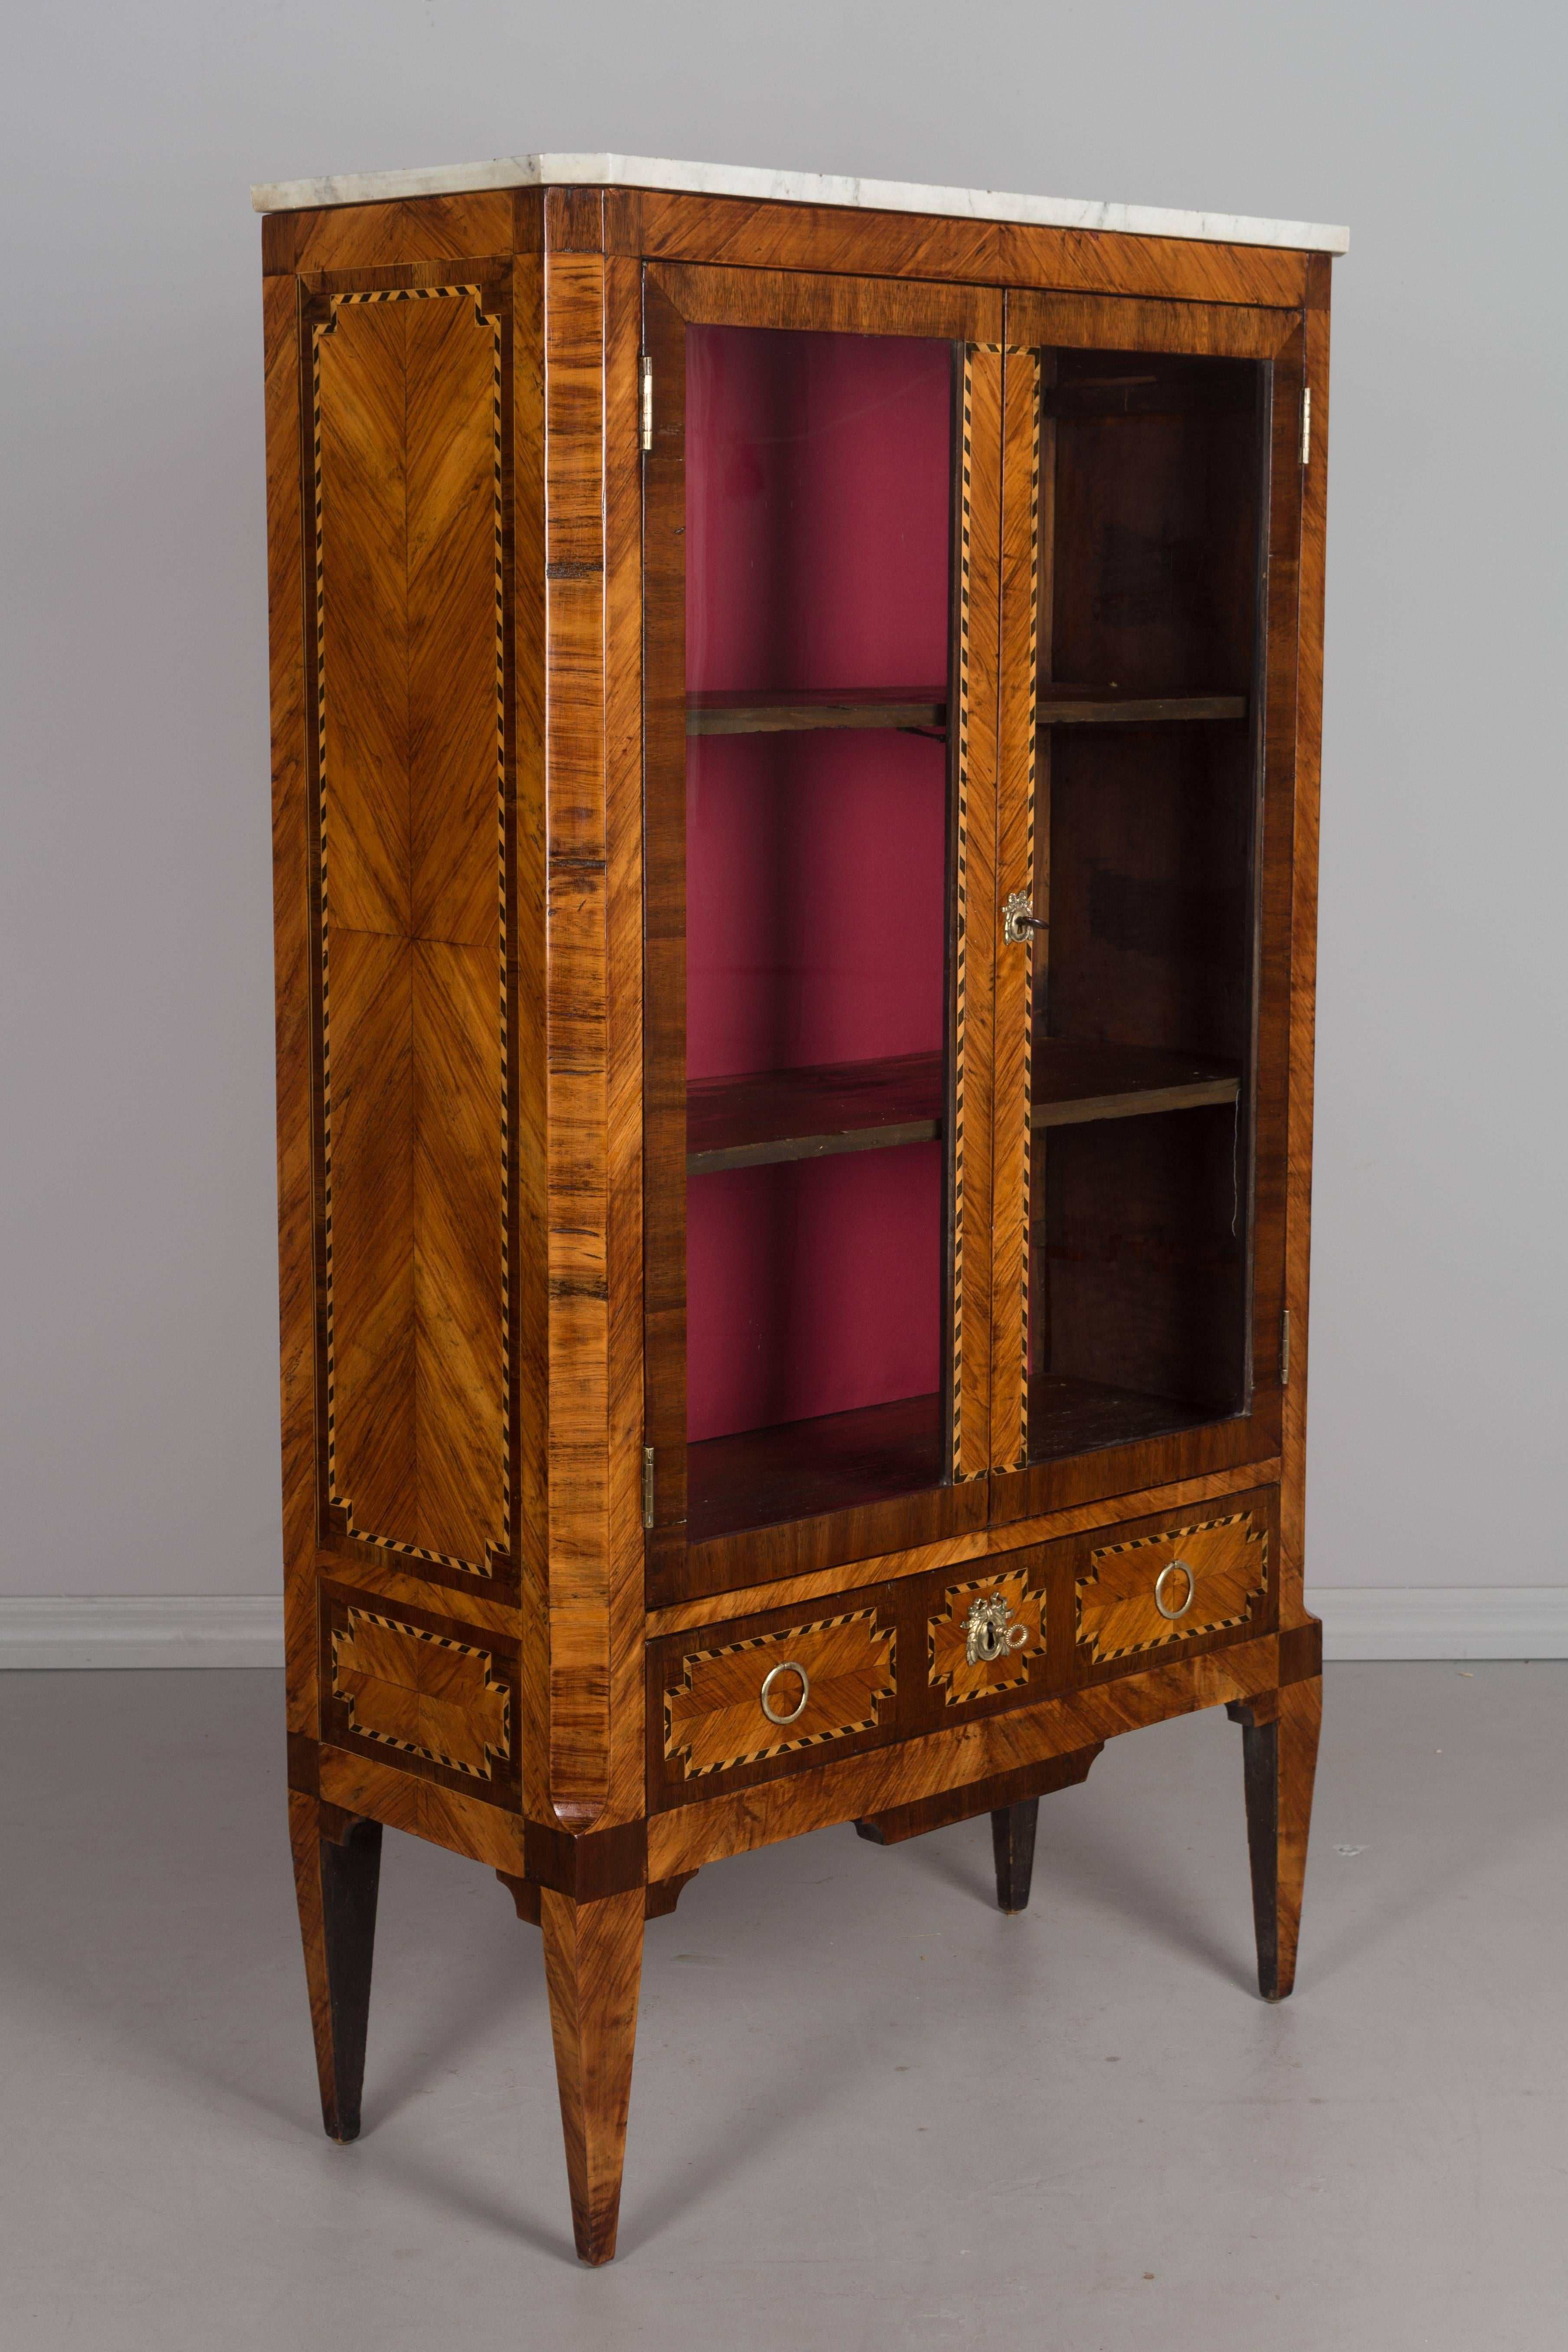 A fine 18th century French Louis XVI marquetry bibliotheque, or bookcase with inlaid veneer of rosewood, walnut and mahogany. Dovetailed drawer below glass paned doors opening to three shelves with newly lined fabric interior. Bronze hardware and